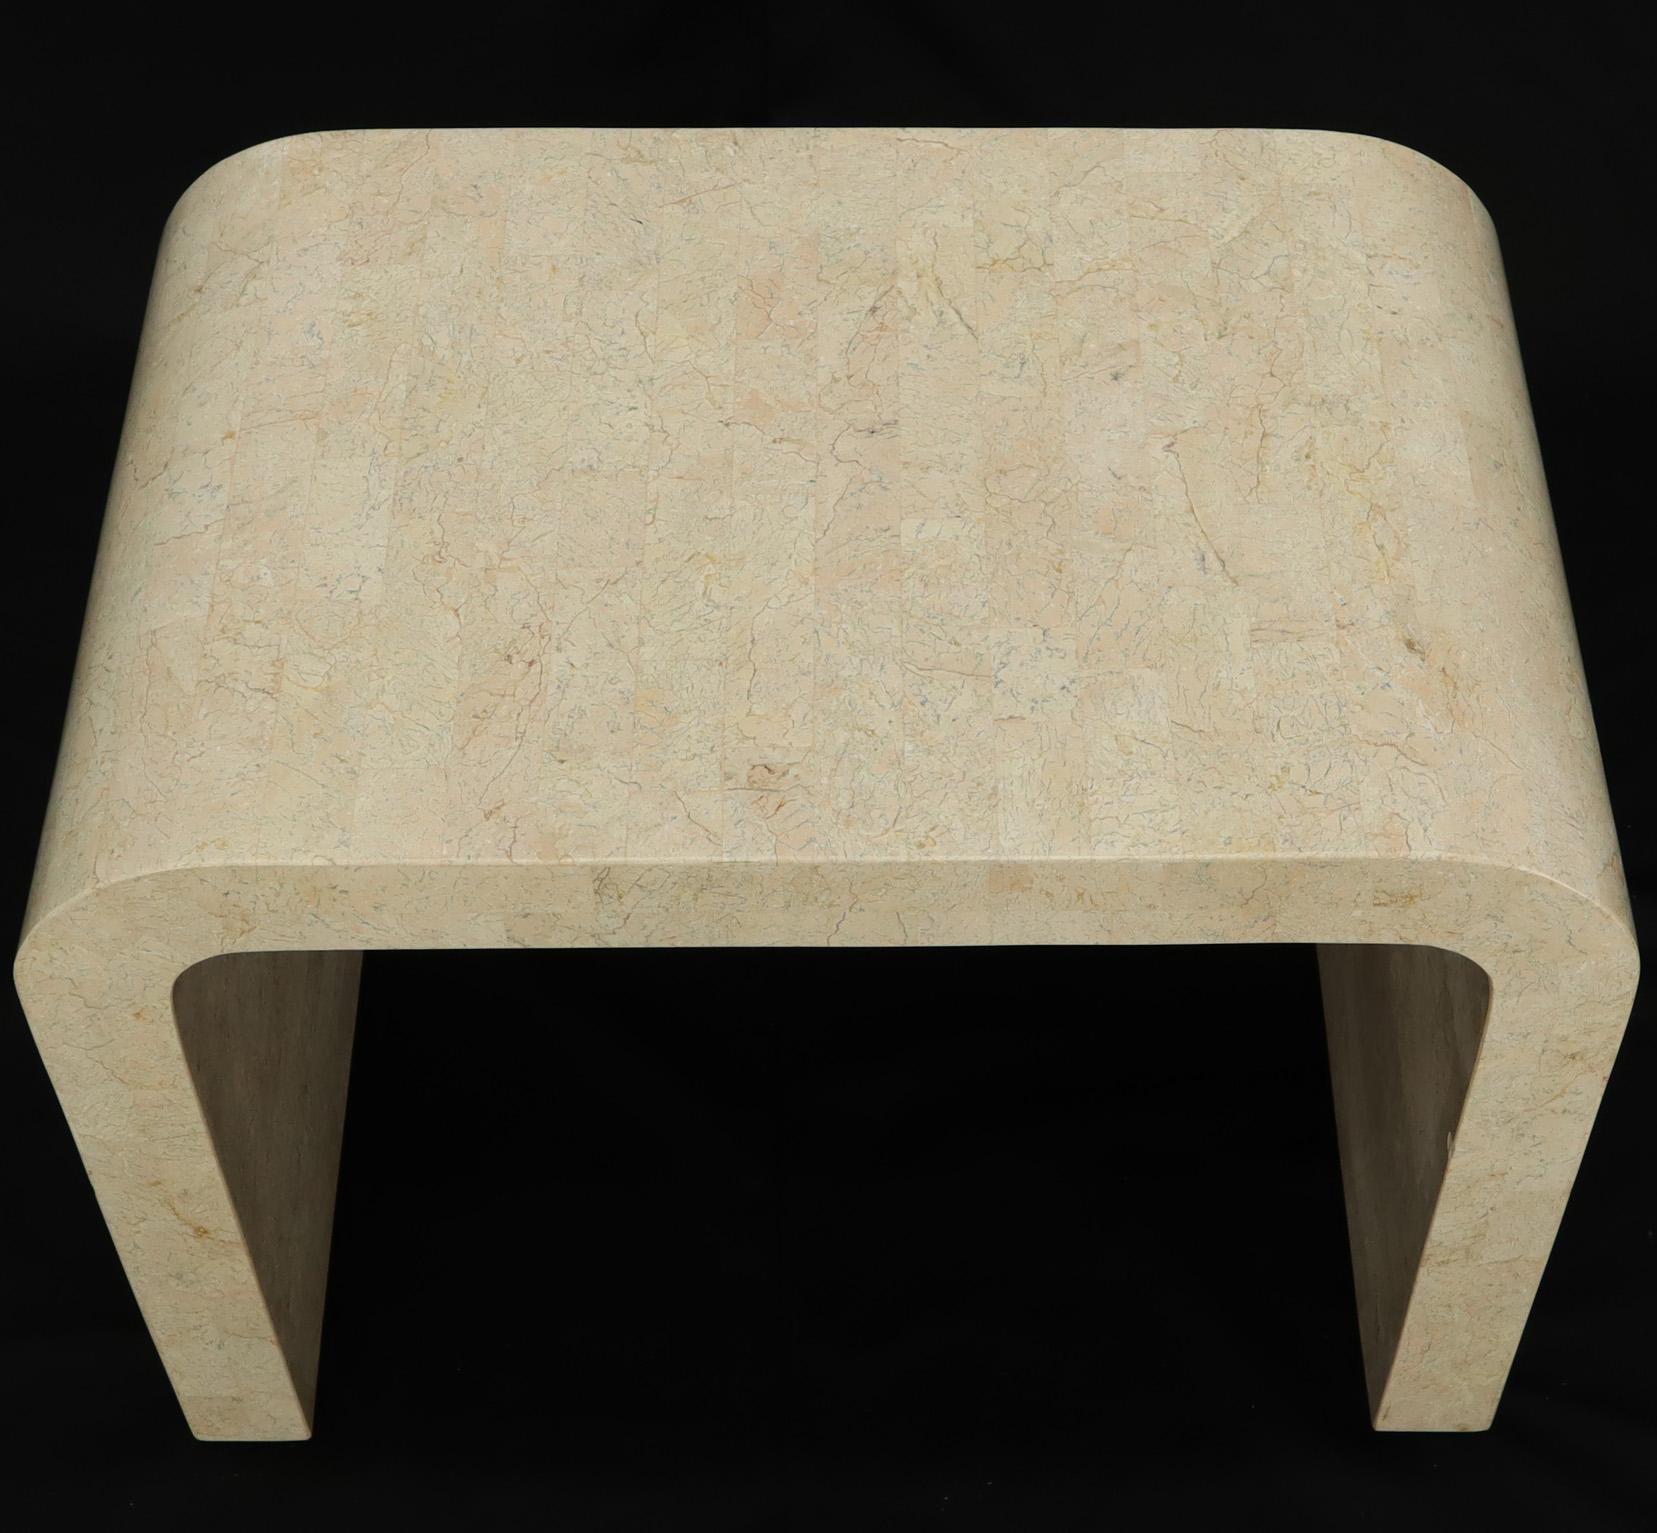 Tessellated Stone Veneer C Shape Side Coffee End Table In Excellent Condition For Sale In Rockaway, NJ